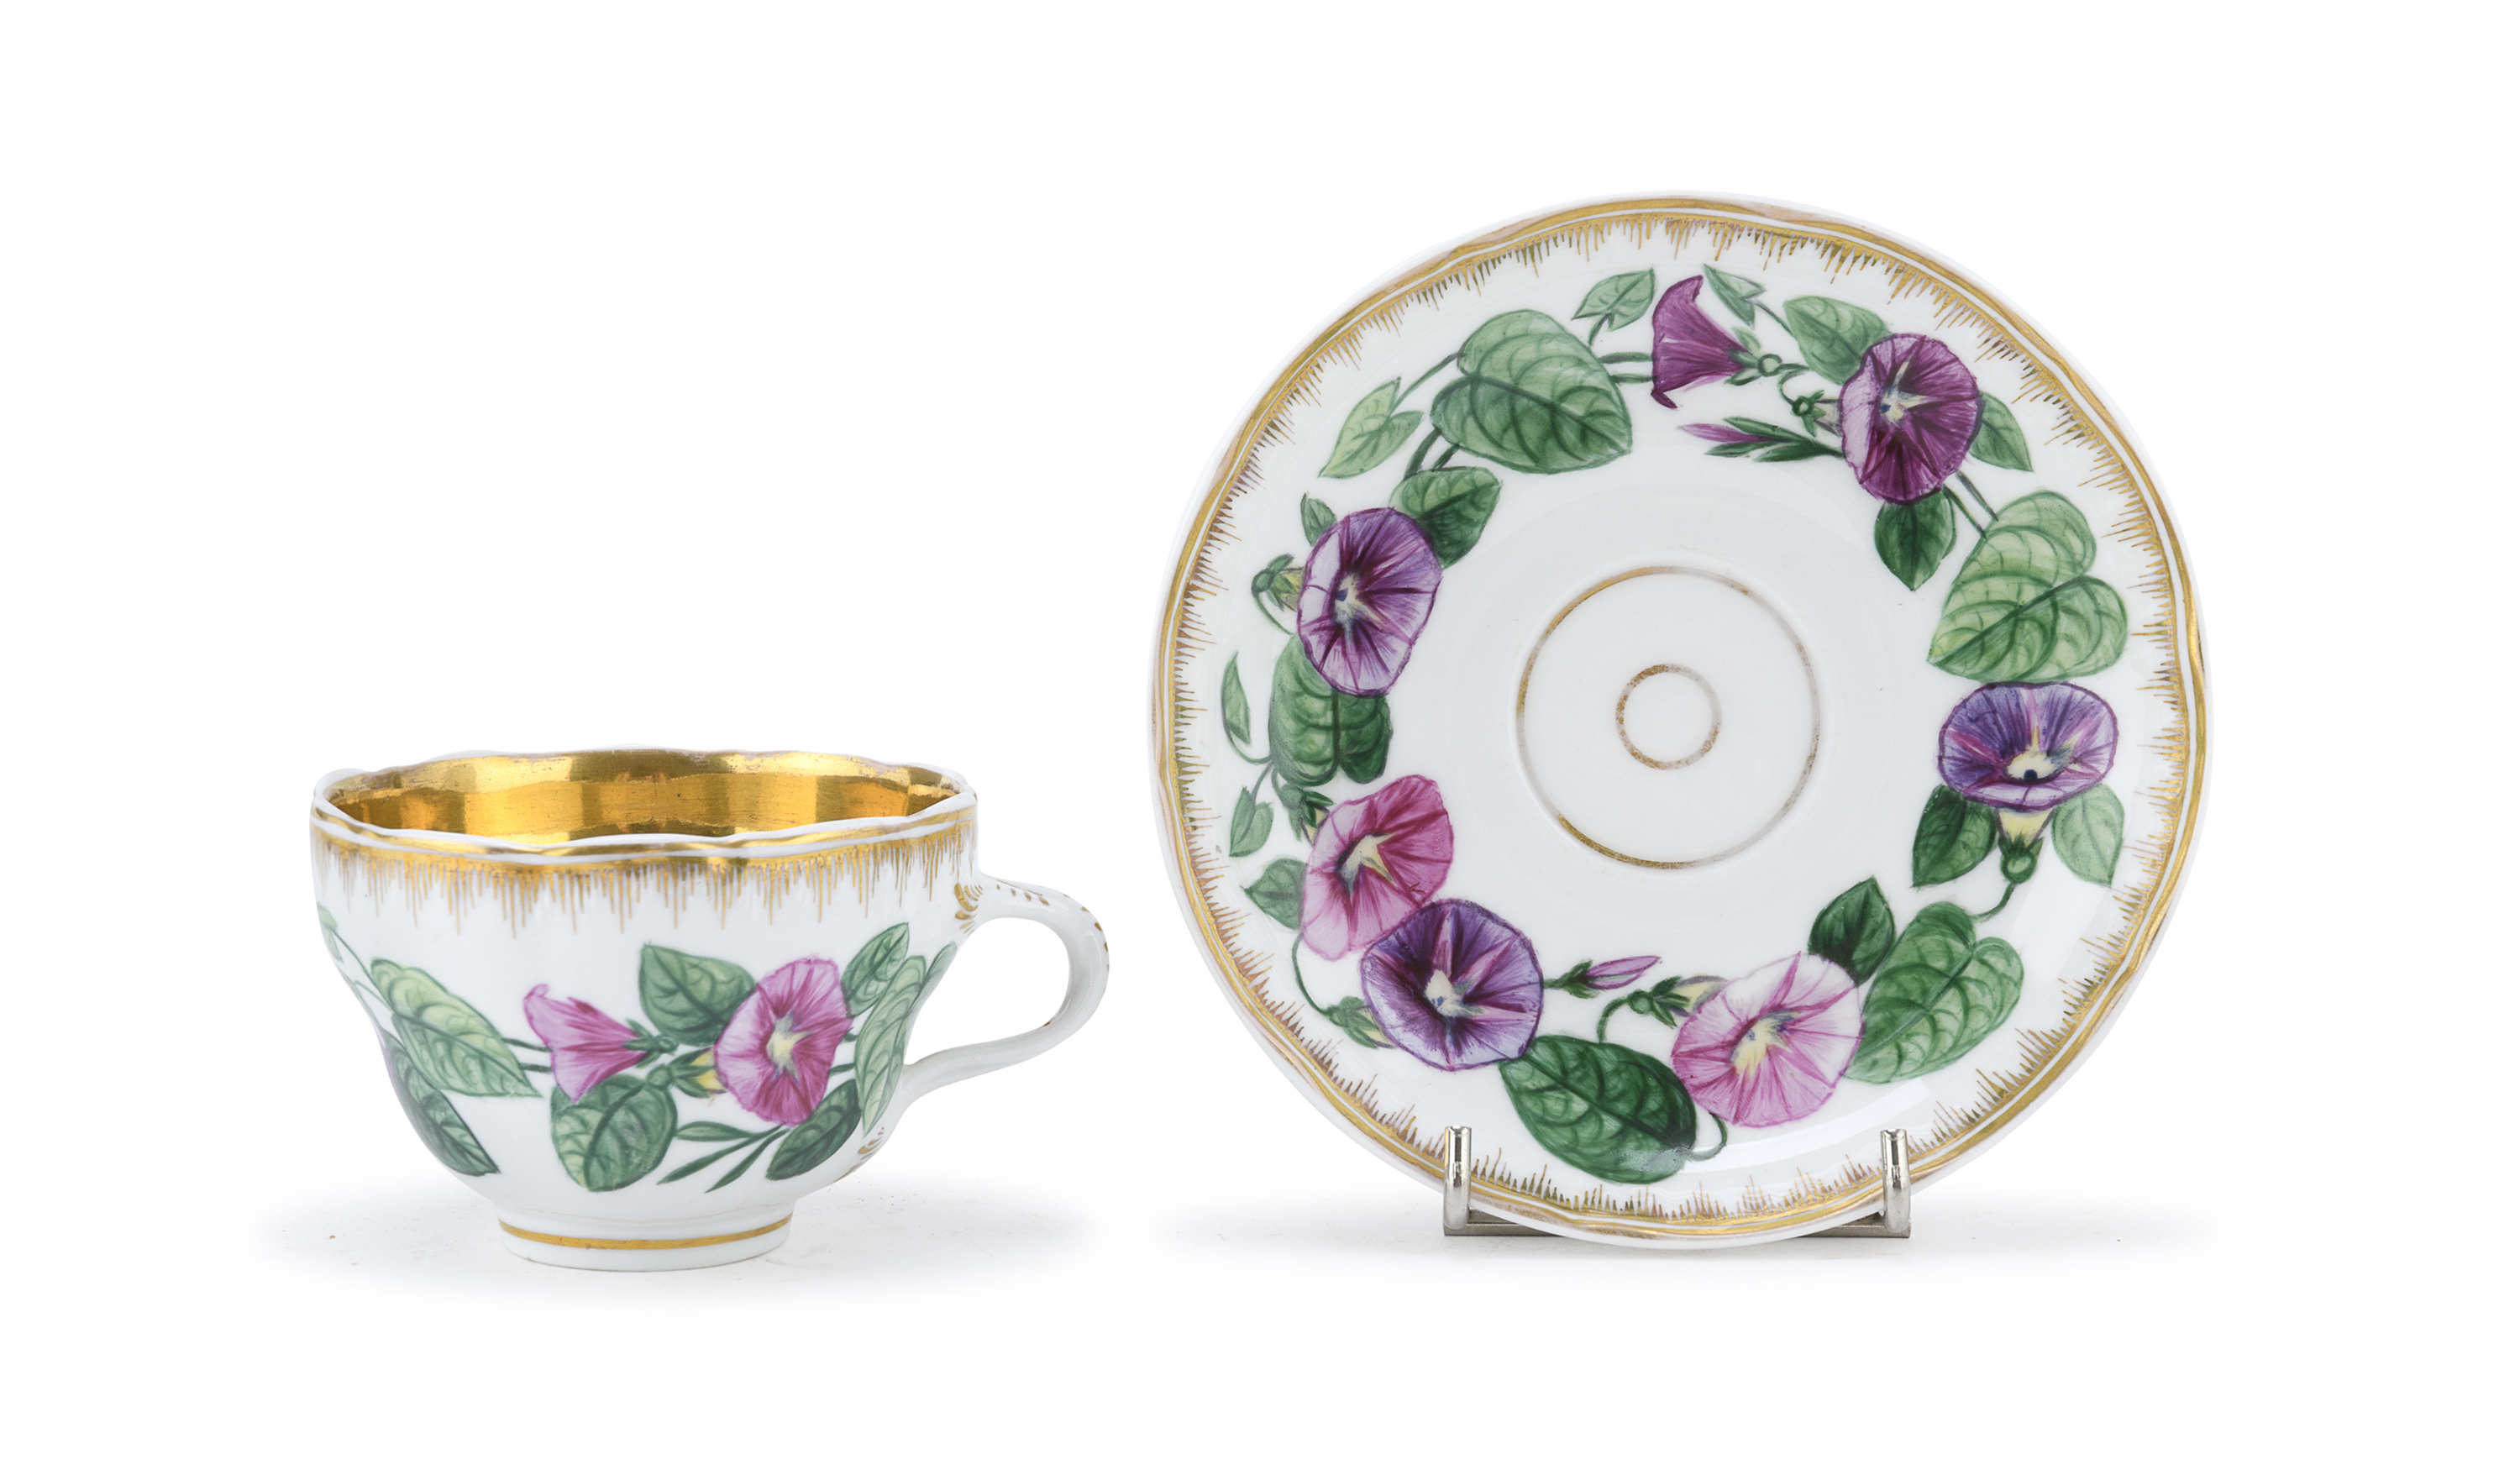 PORCELAIN CUP AND SAUCER BERLIN LATE 19TH CENTURY